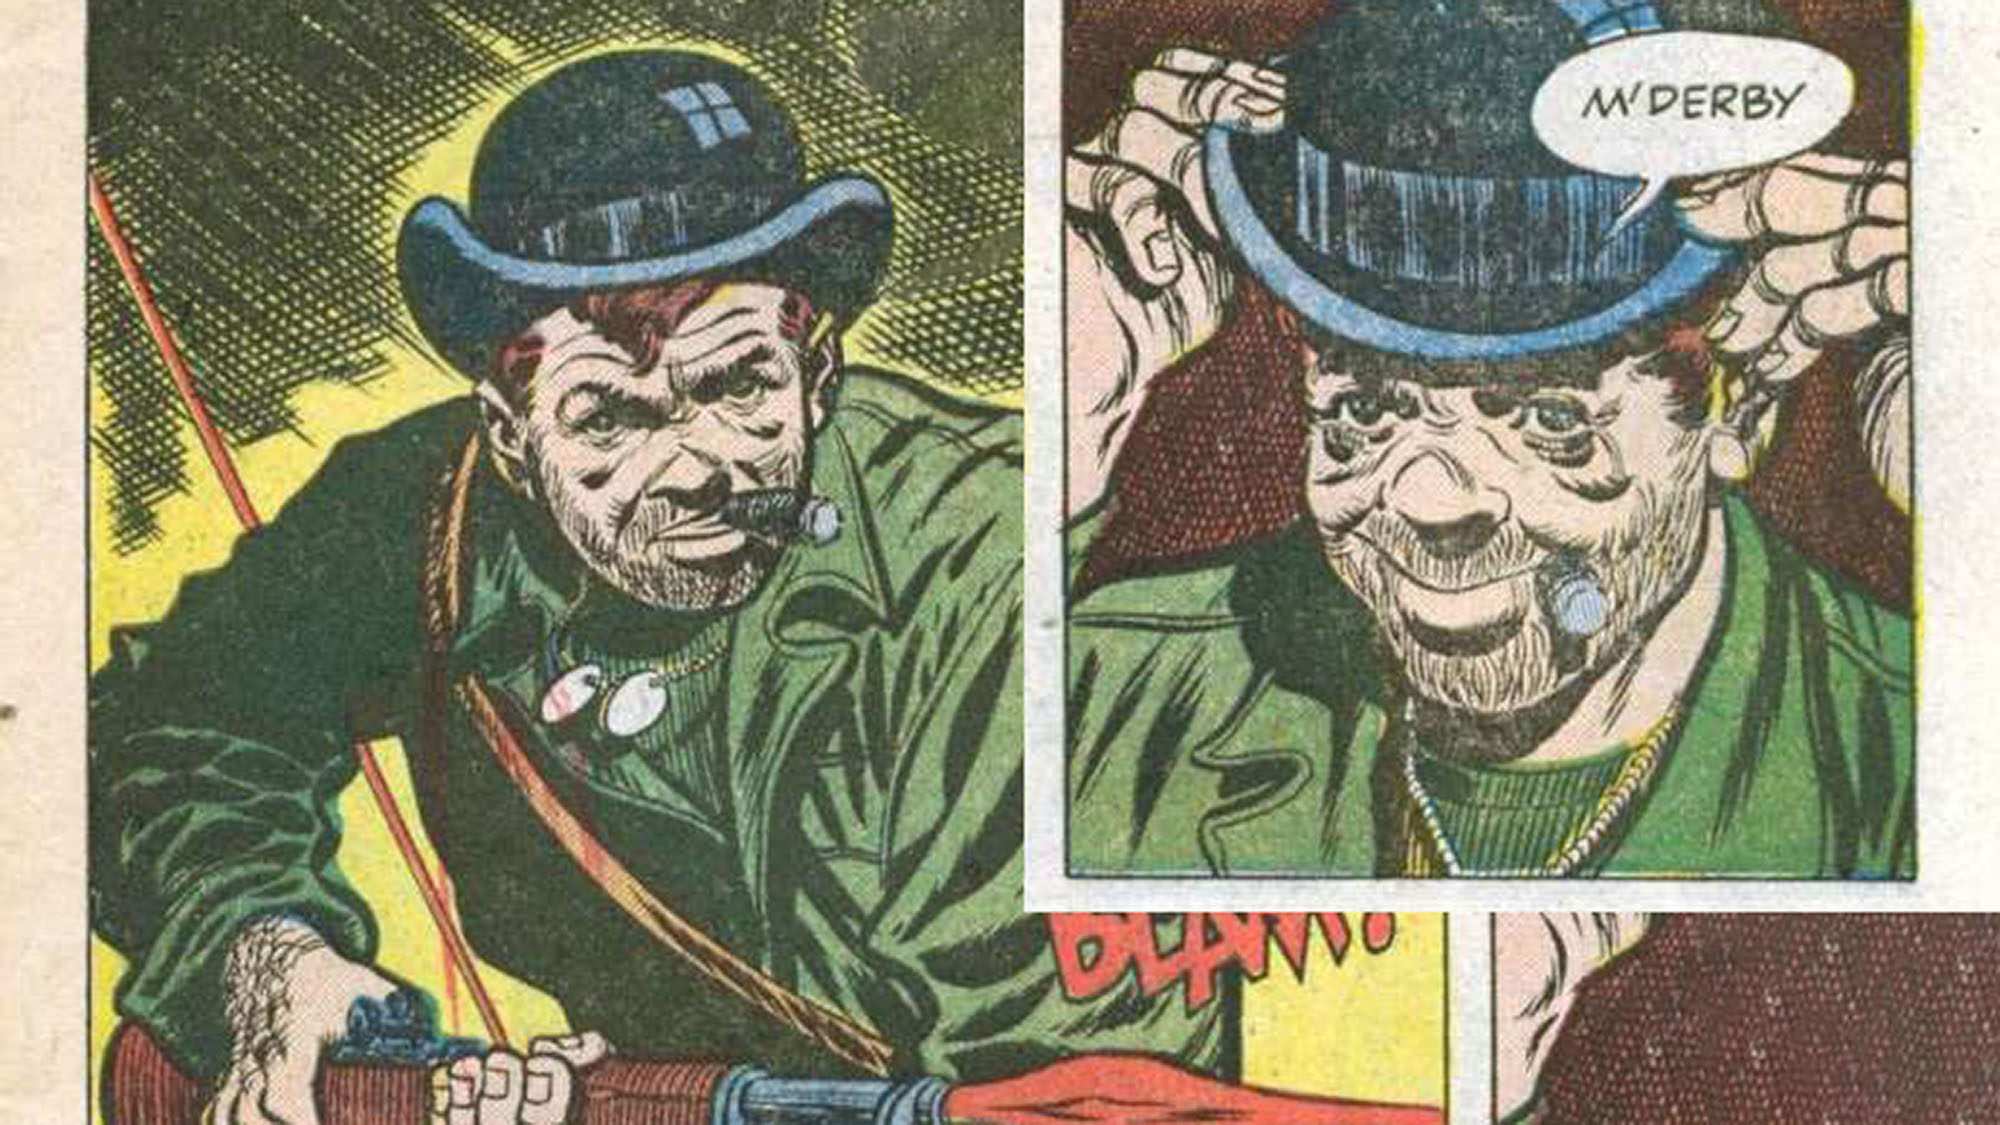 Don Heck’s debut in “Notorious War Fury” is being auctioned